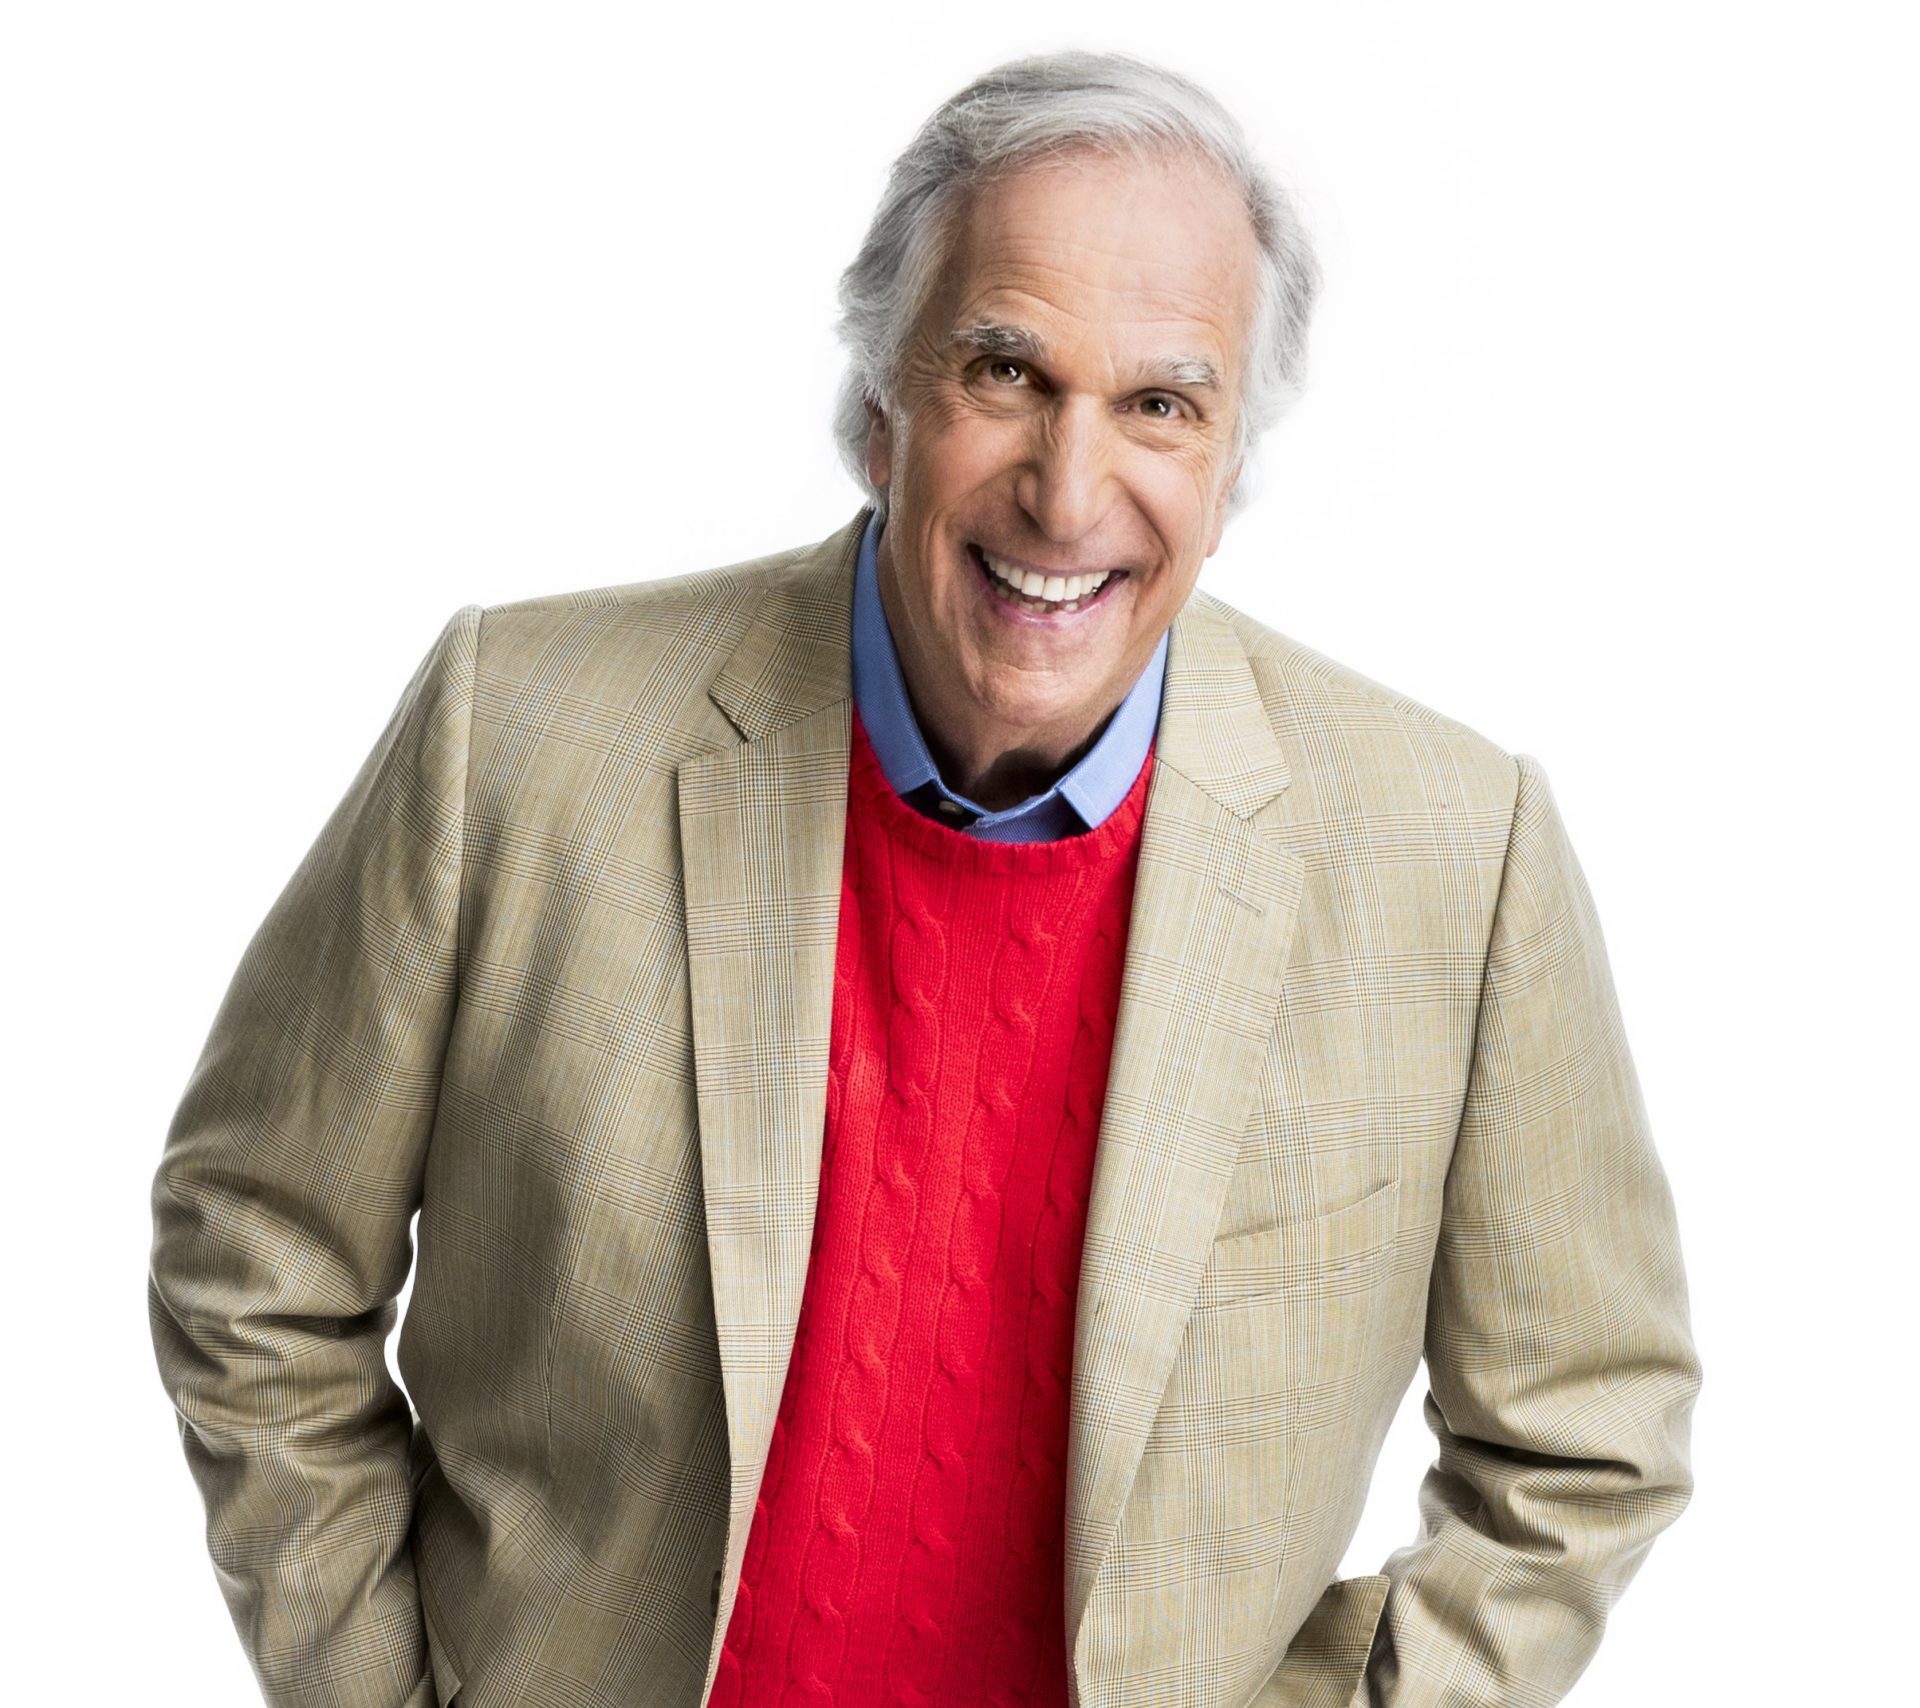 Henry Winkler smiles with his hands in his jacket pocket